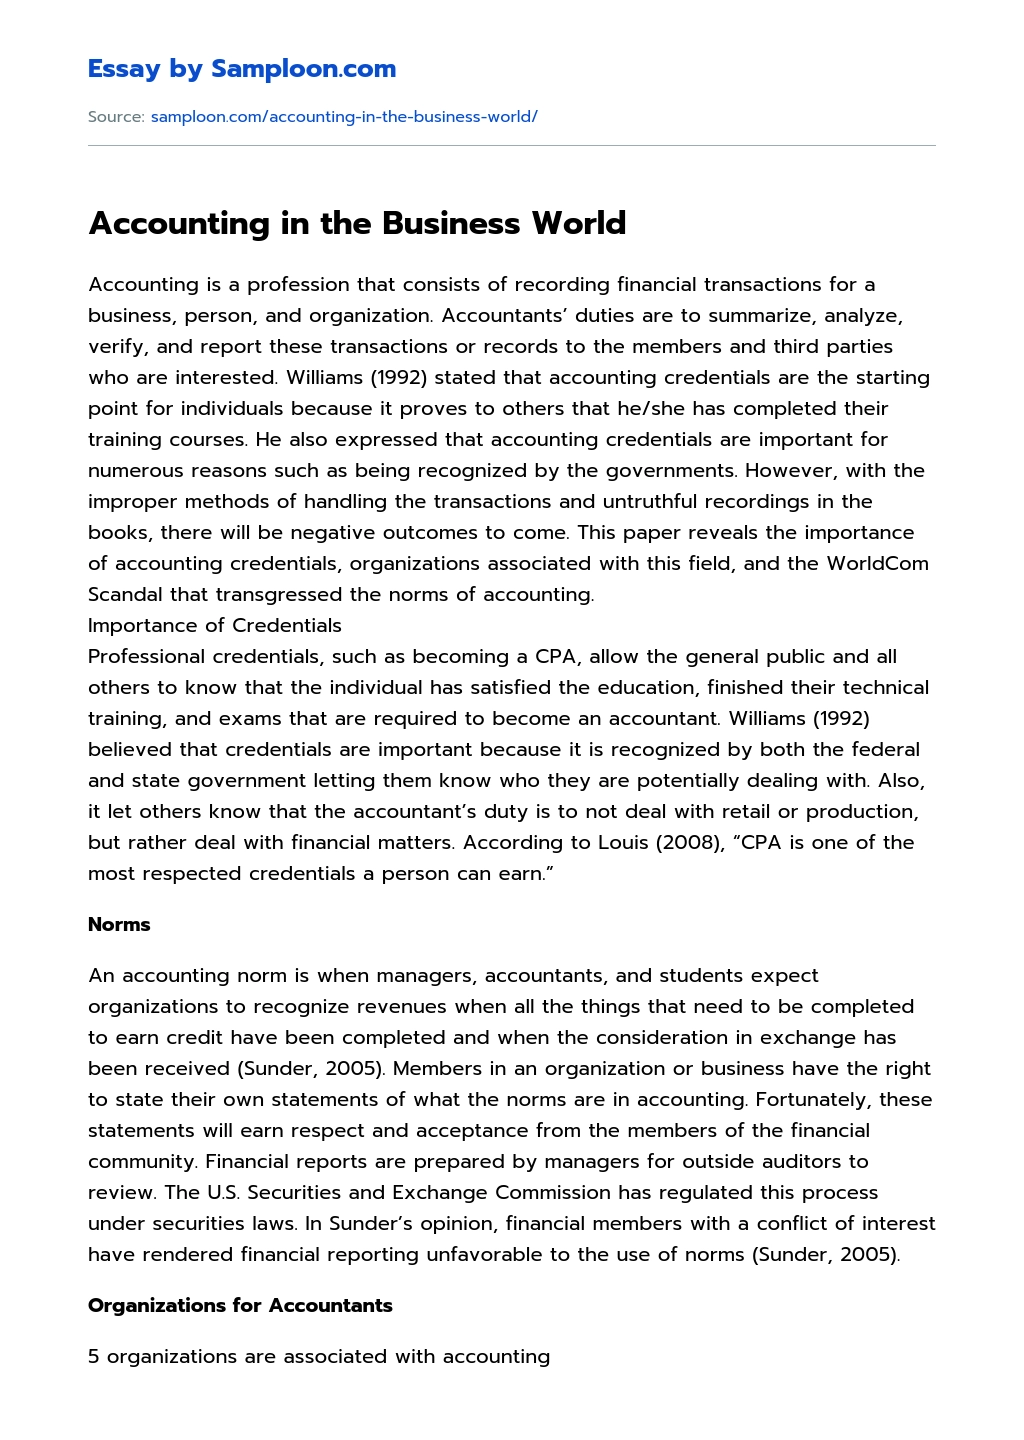 Accounting in the Business World essay